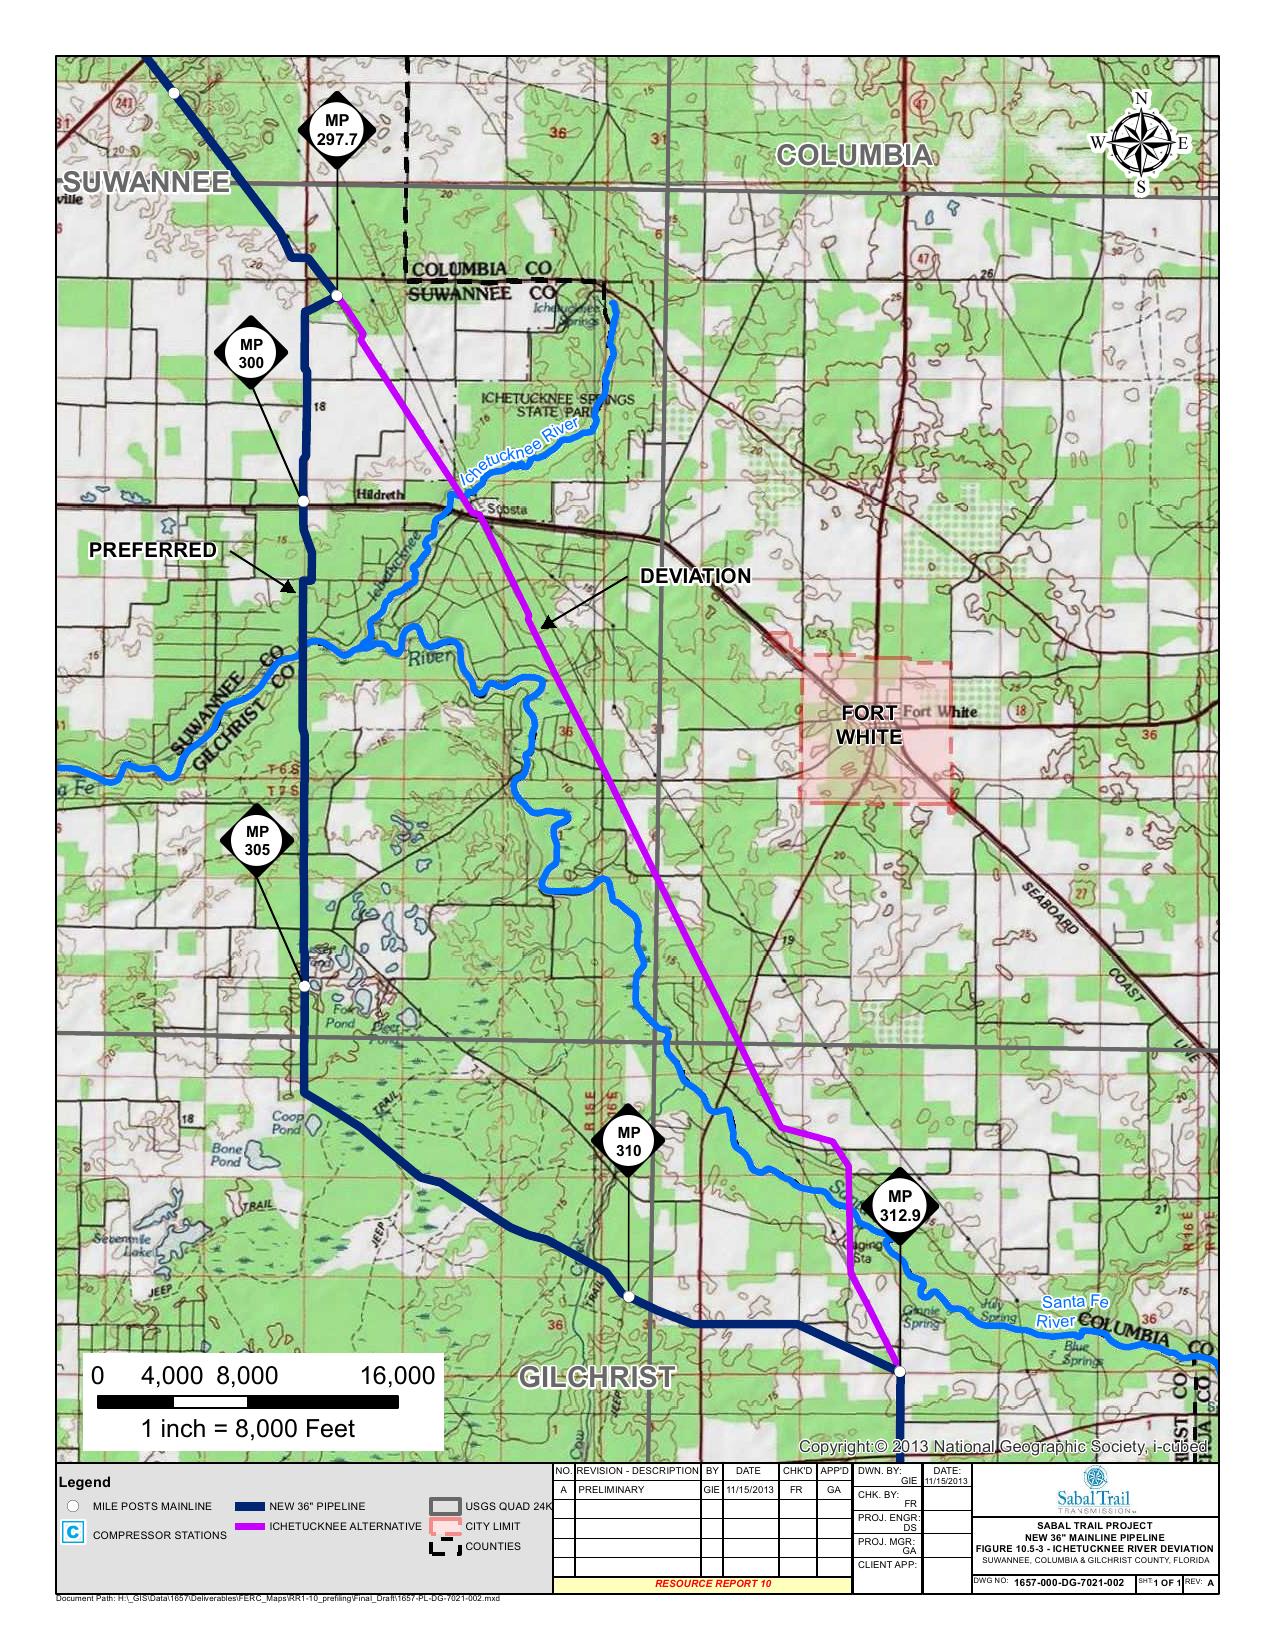 Ichetucknee River Deviation, Suwannee County, Columbia County, Gilchrist County, Florida, in Alternatives, by Sabal Trail Transmission, for FERC Docket No. PF14-1-000, 15 November 2013, converted by SpectraBusters